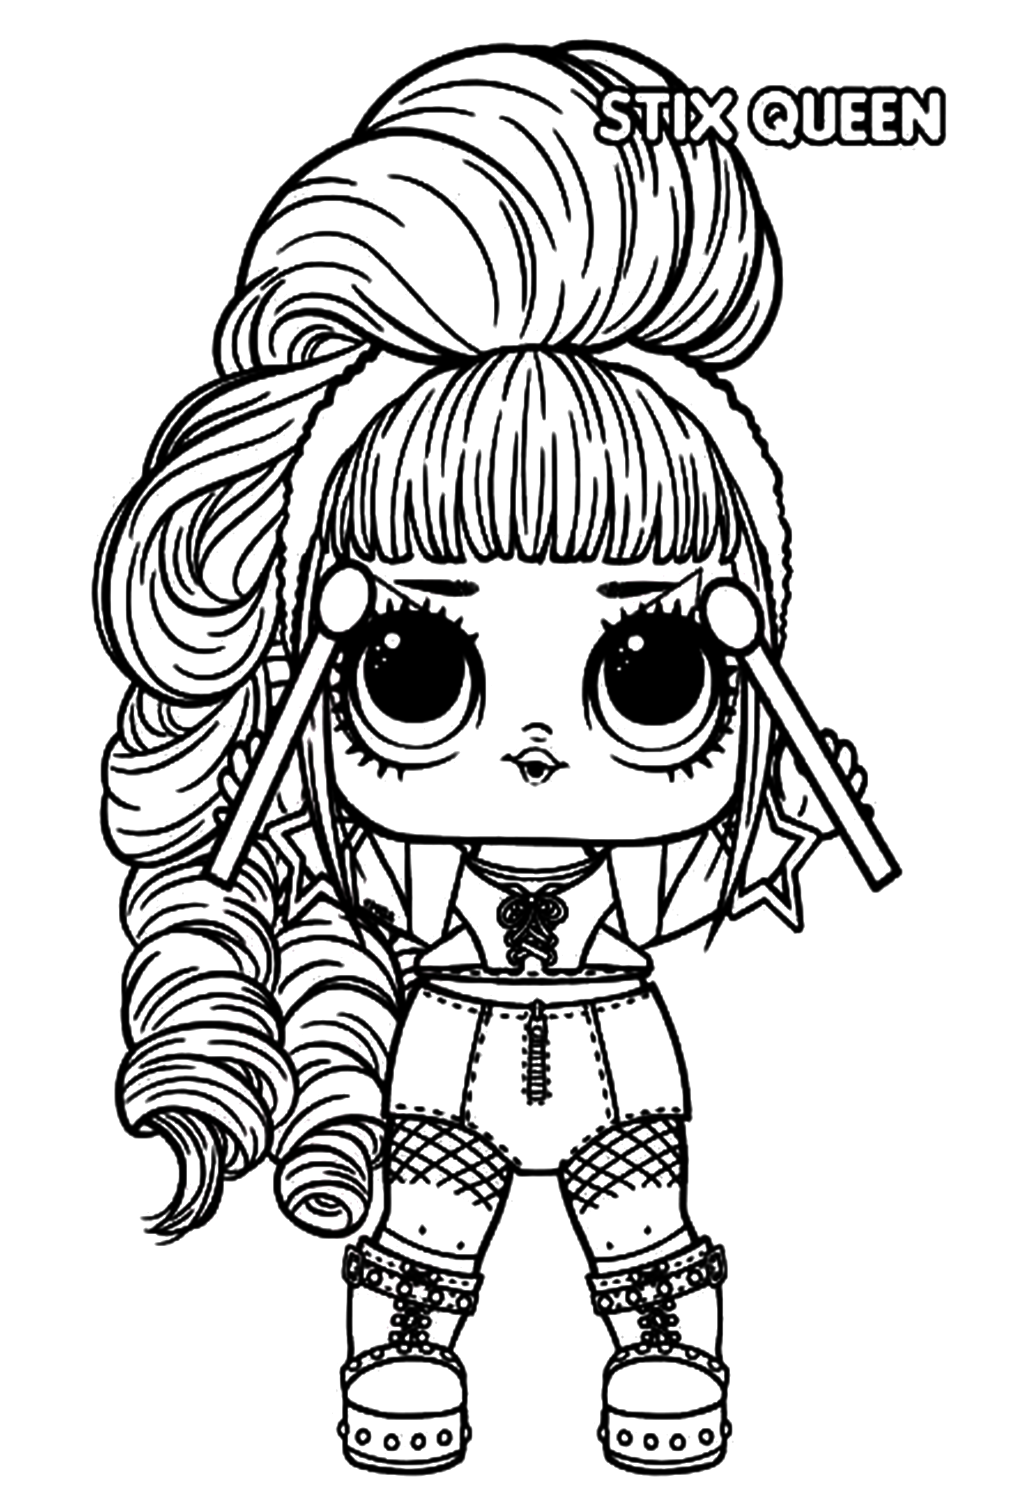 Queen Lol Surprise Doll Coloring Page